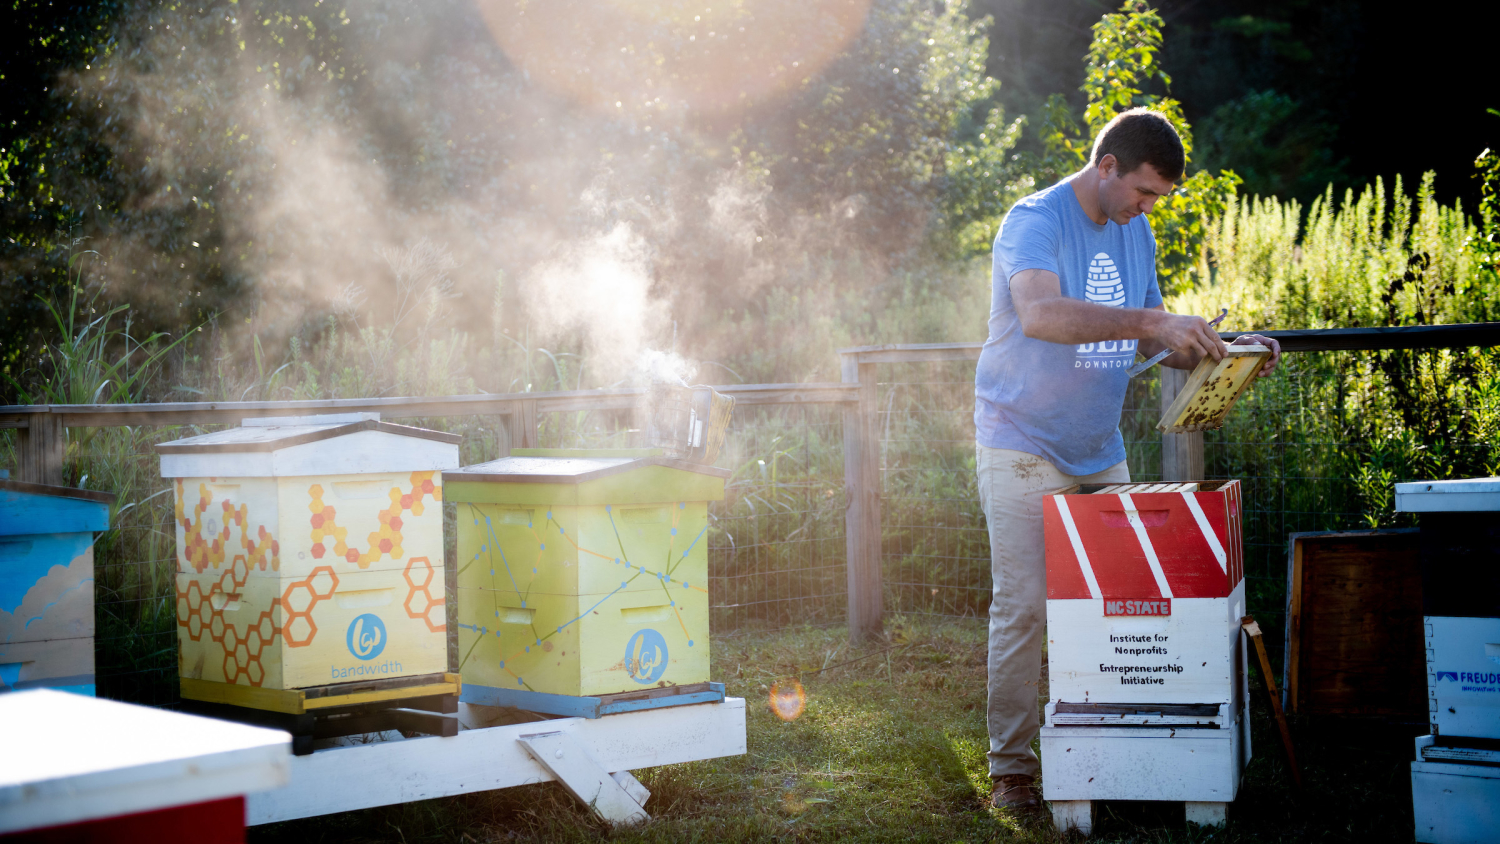 Bandwidth sponsors Bee Downtown's community apiary on Centennial Campus, home to 15,000 honey bees.